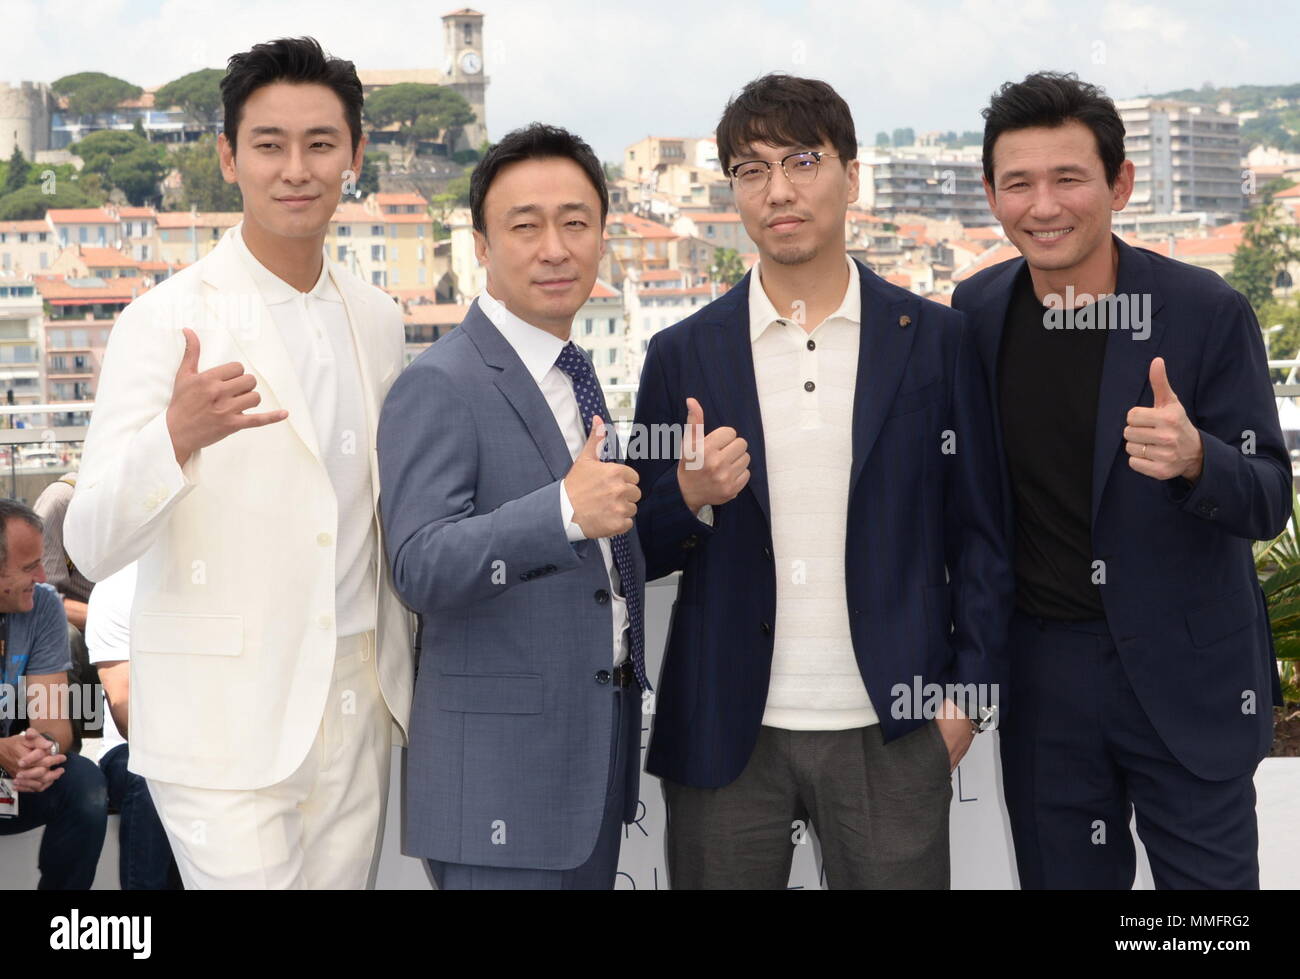 Cannes, France. 11th May, 2018. CANNES, FRANCE - MAY 11: (R-L) Actors Jung-min Hwang, Sung-min Lee and Ji-Hoon Ju attend the photocall for 'The Spy Gone North (Gongjak)' during the 71st annual Cannes Film Festival at Palais des Festivals on May 11, 2018 in Cannes, France. Credit: Frederick Injimbert/ZUMA Wire/Alamy Live News Stock Photo